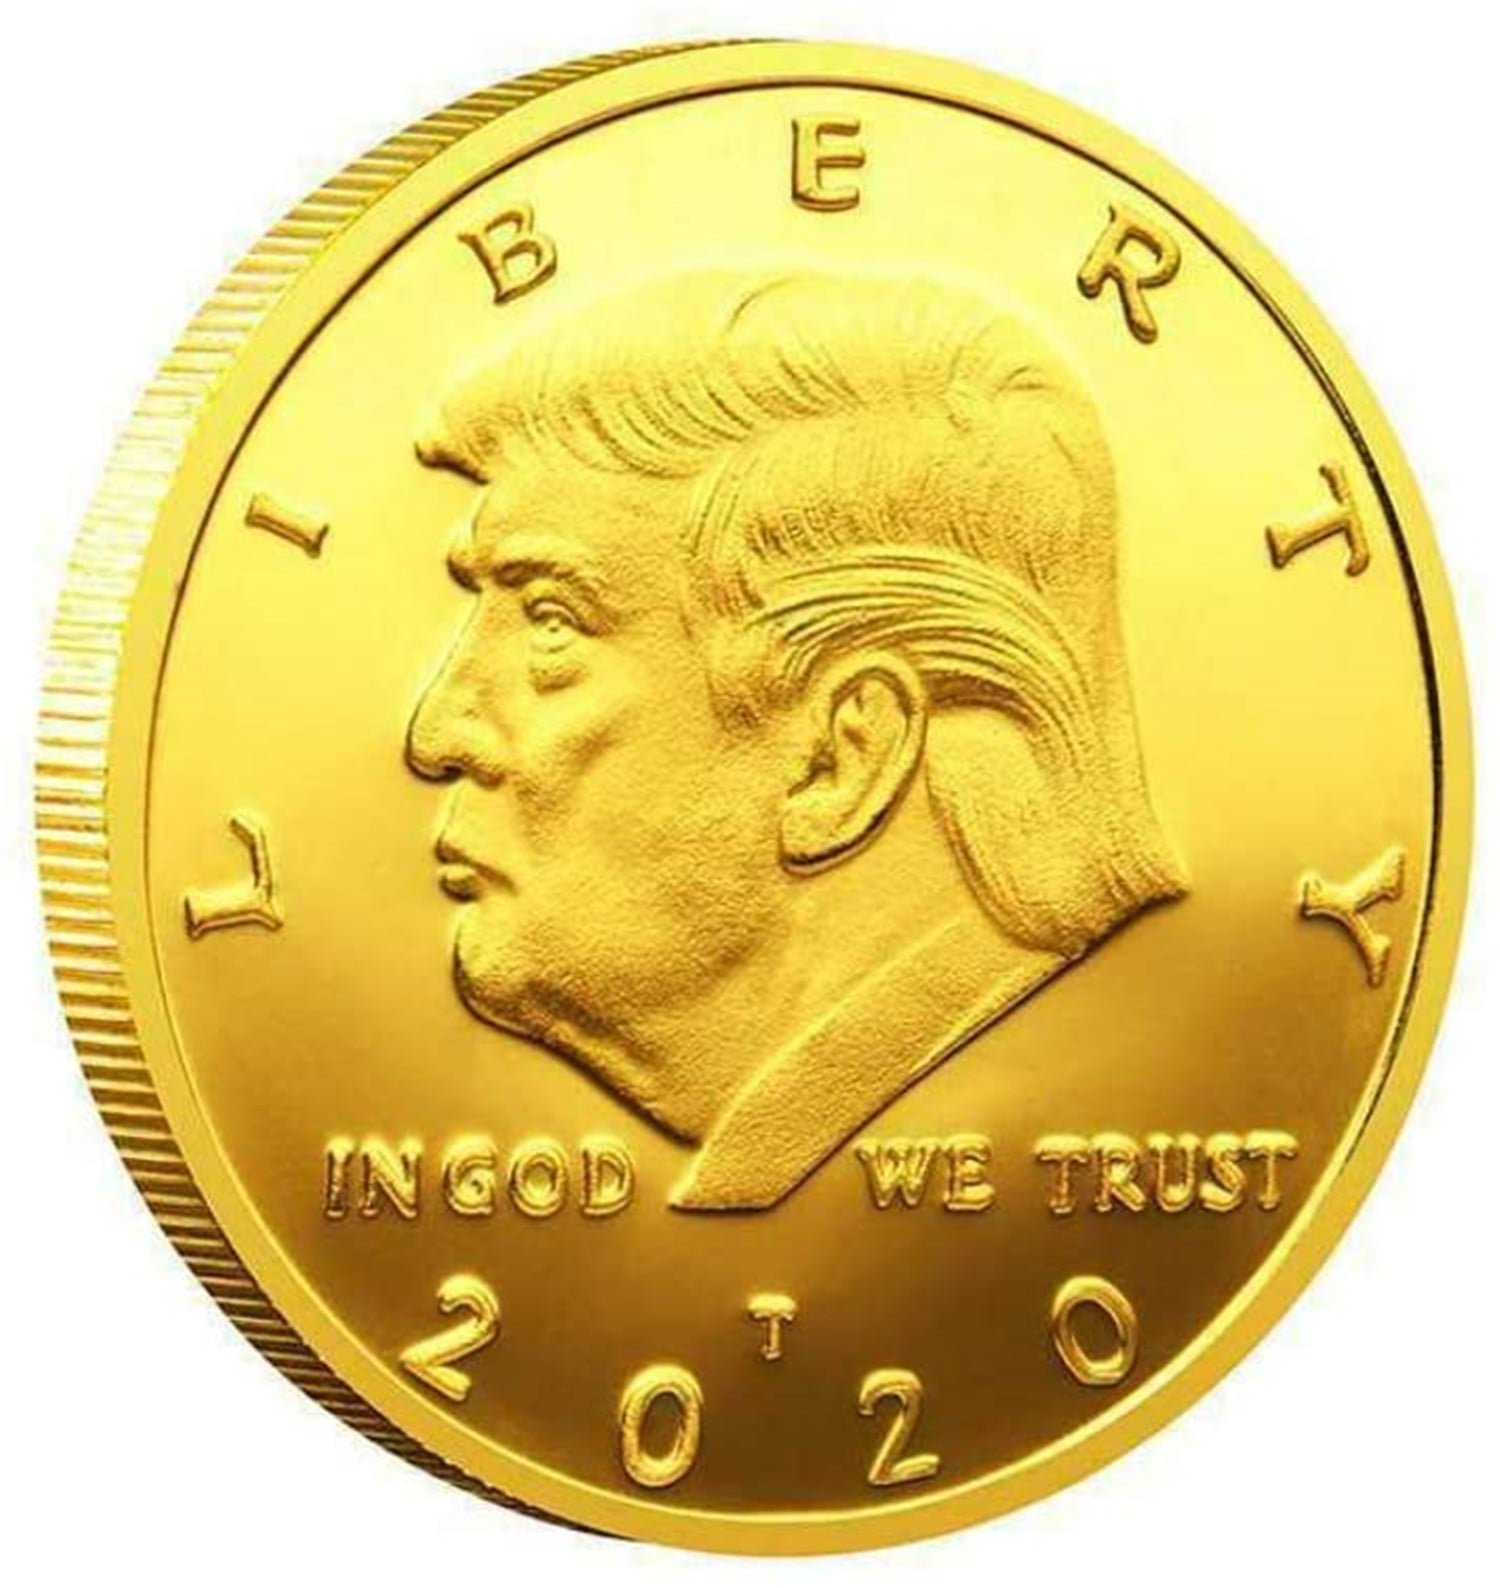 2018 New Donald Trump Gold Plated Commemorative coin Collectibles 